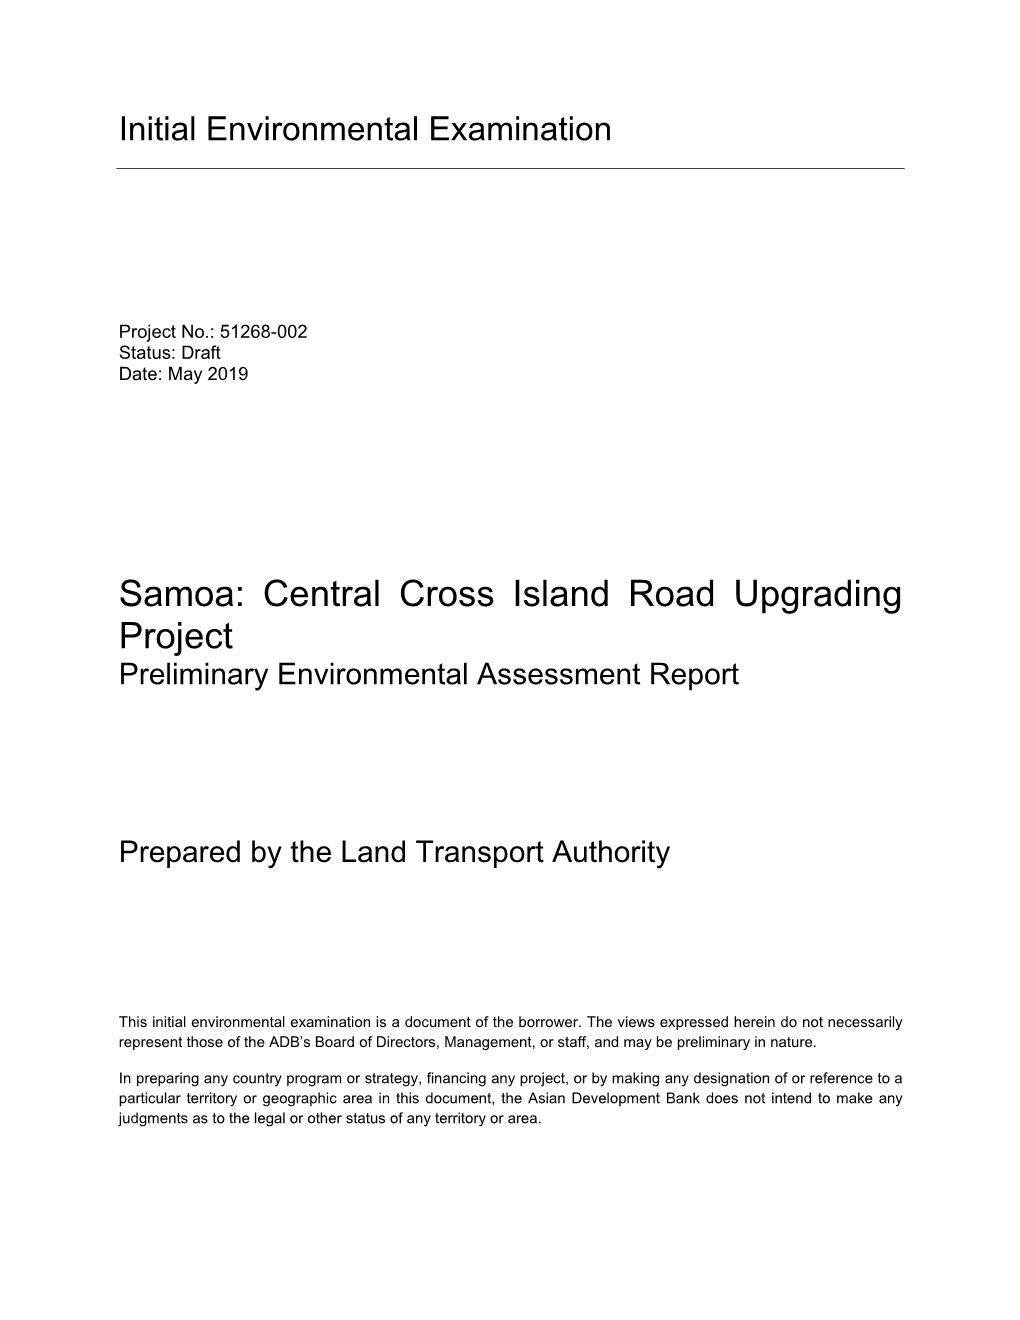 51268-002: Central Cross Island Road Upgrading Project